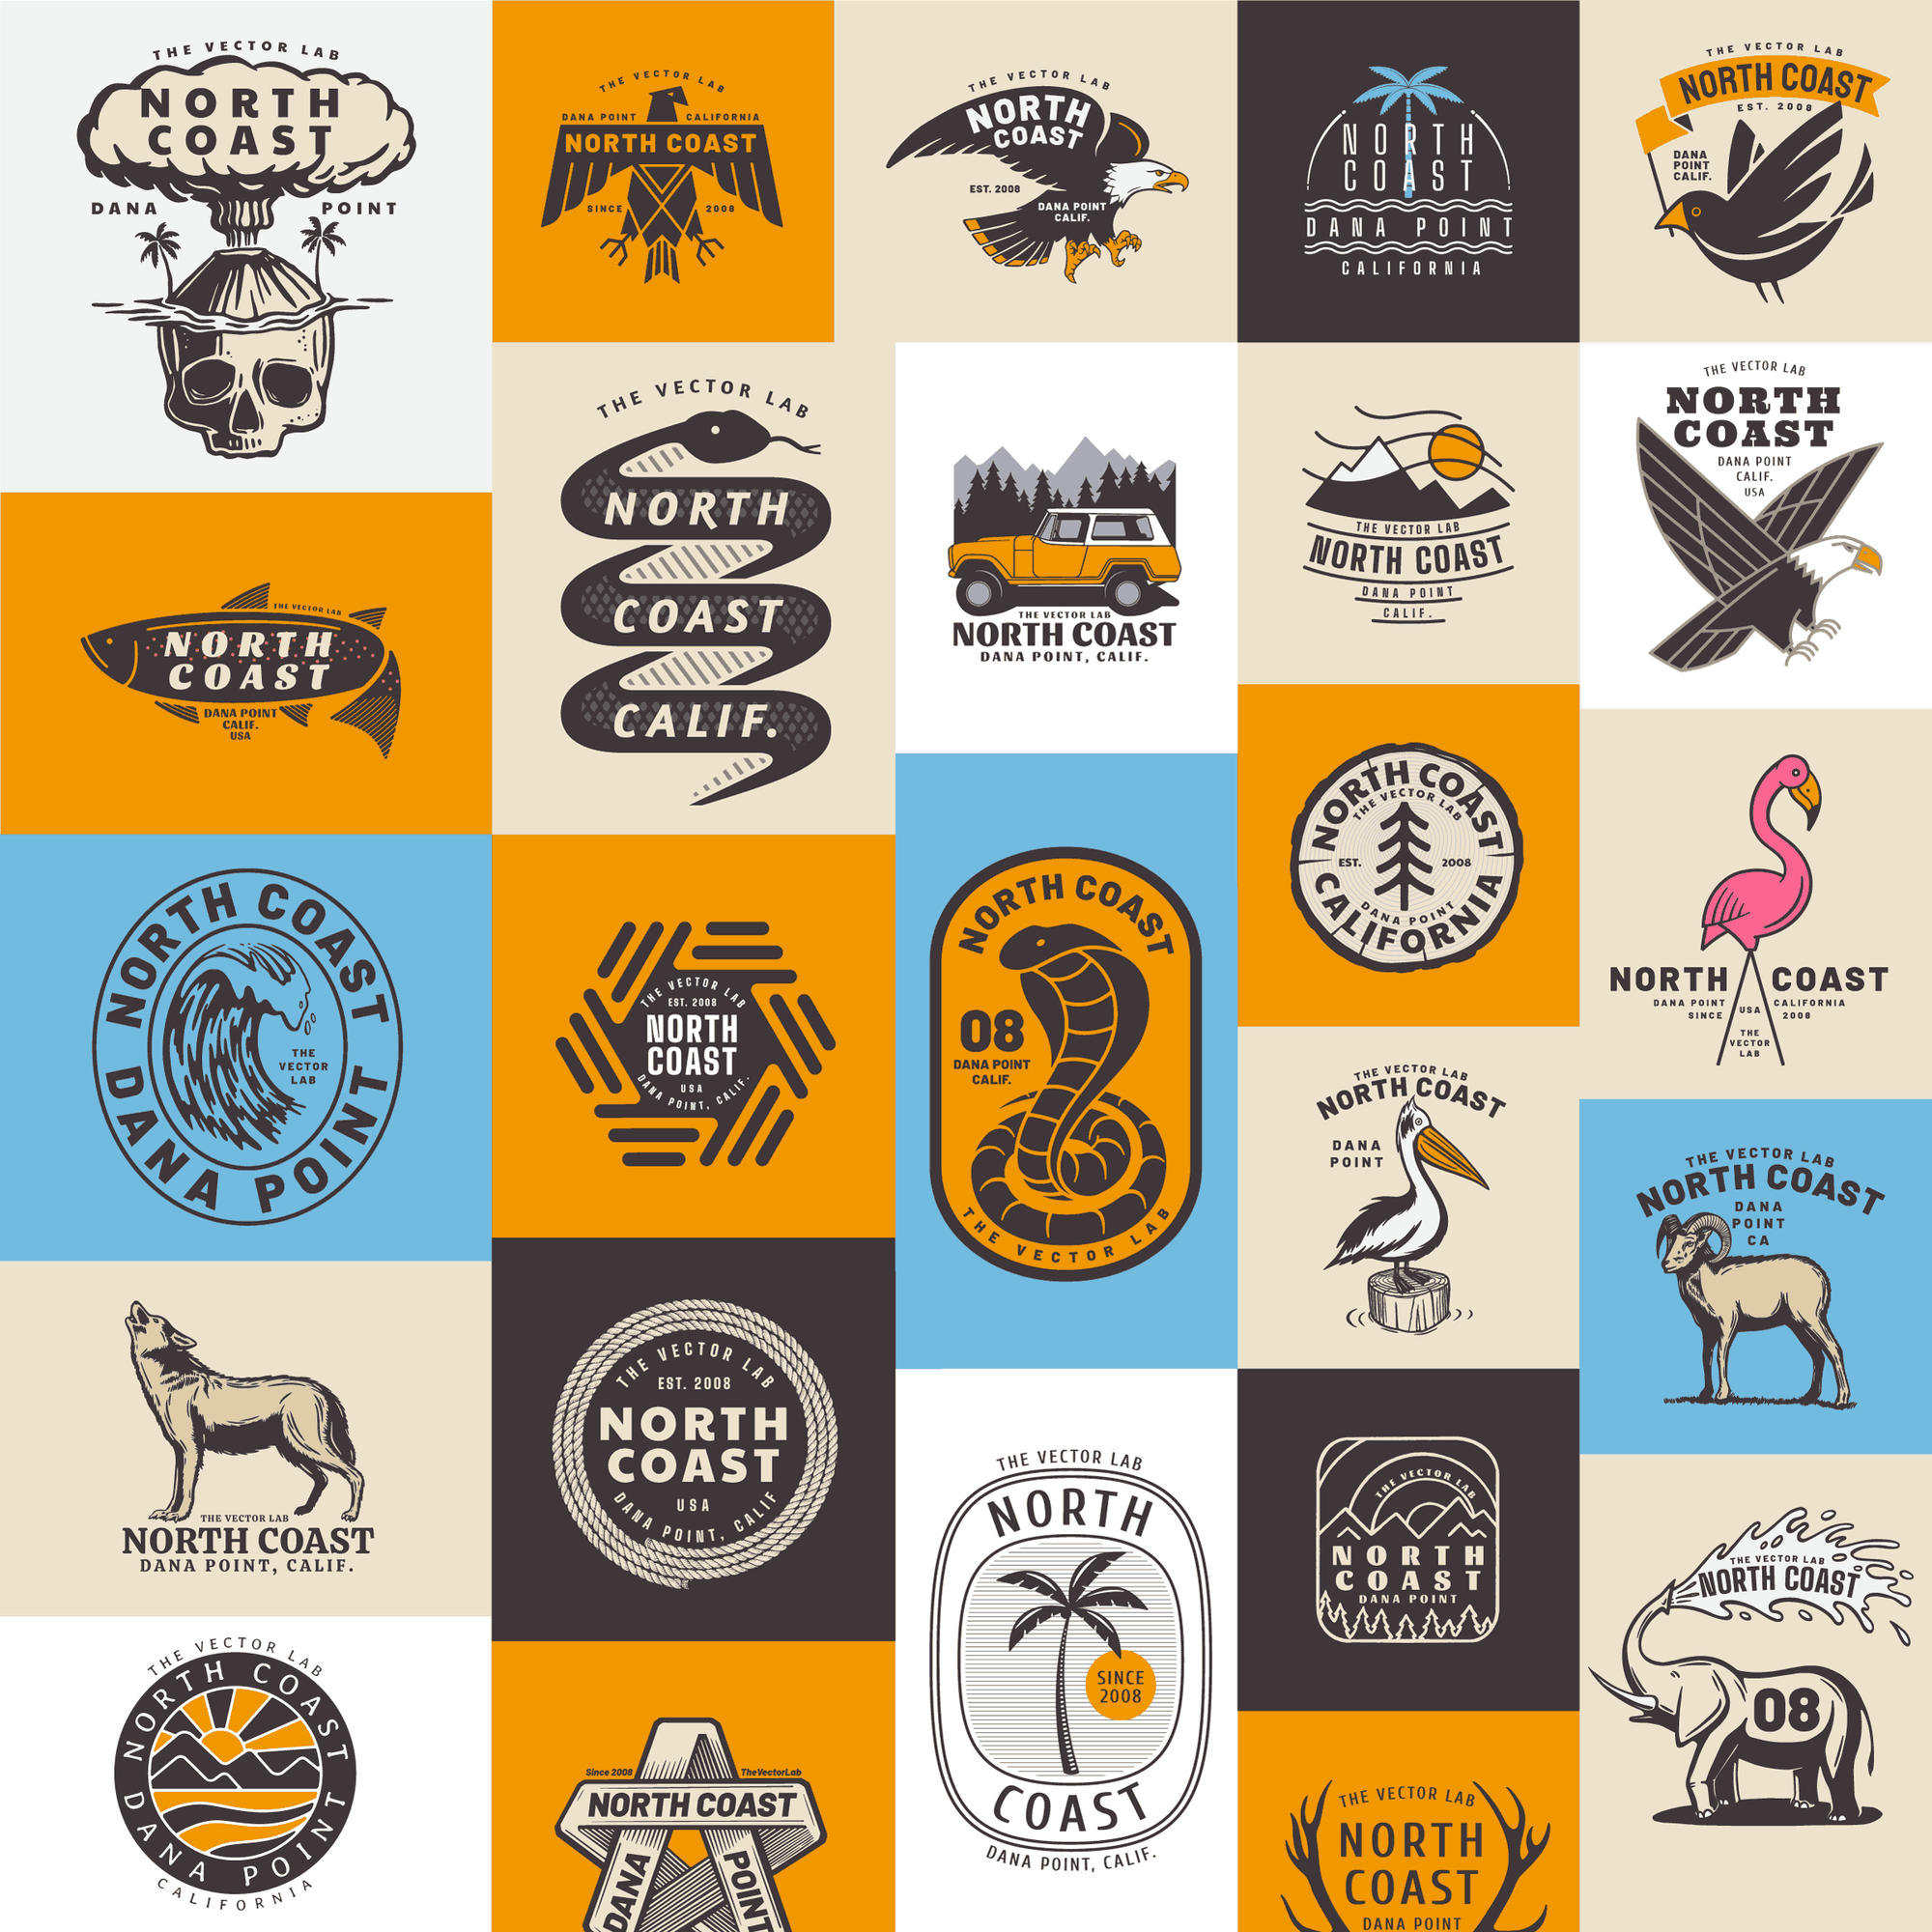 North Coast Collection of Graphic & Logo Templates for Adobe Affinity CorelDraw